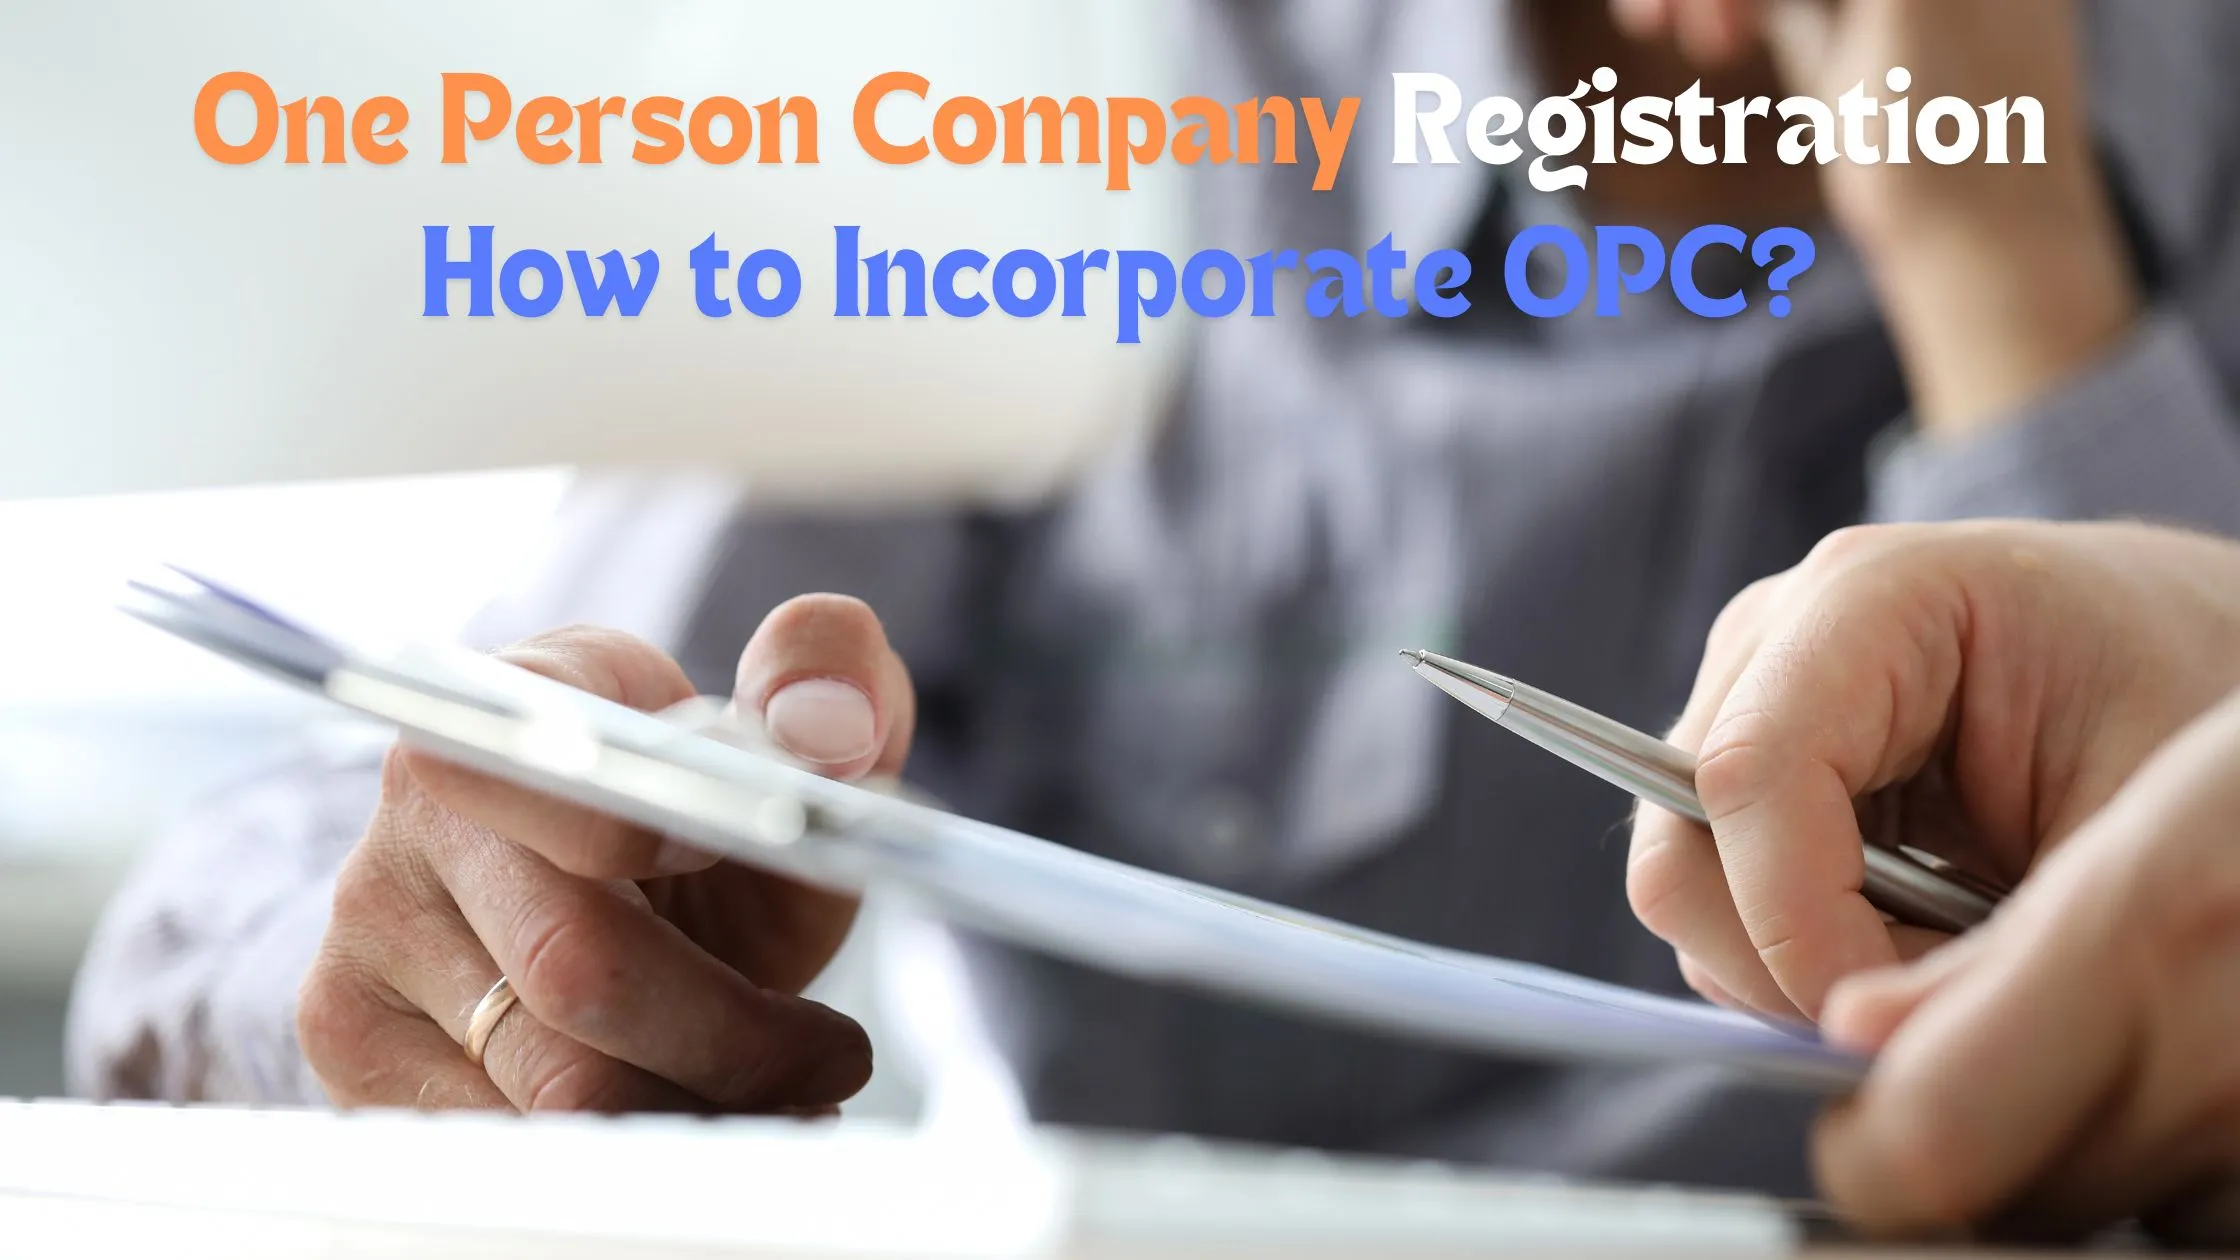 One Person Company Registration in India: How to Incorporate OPC in India?